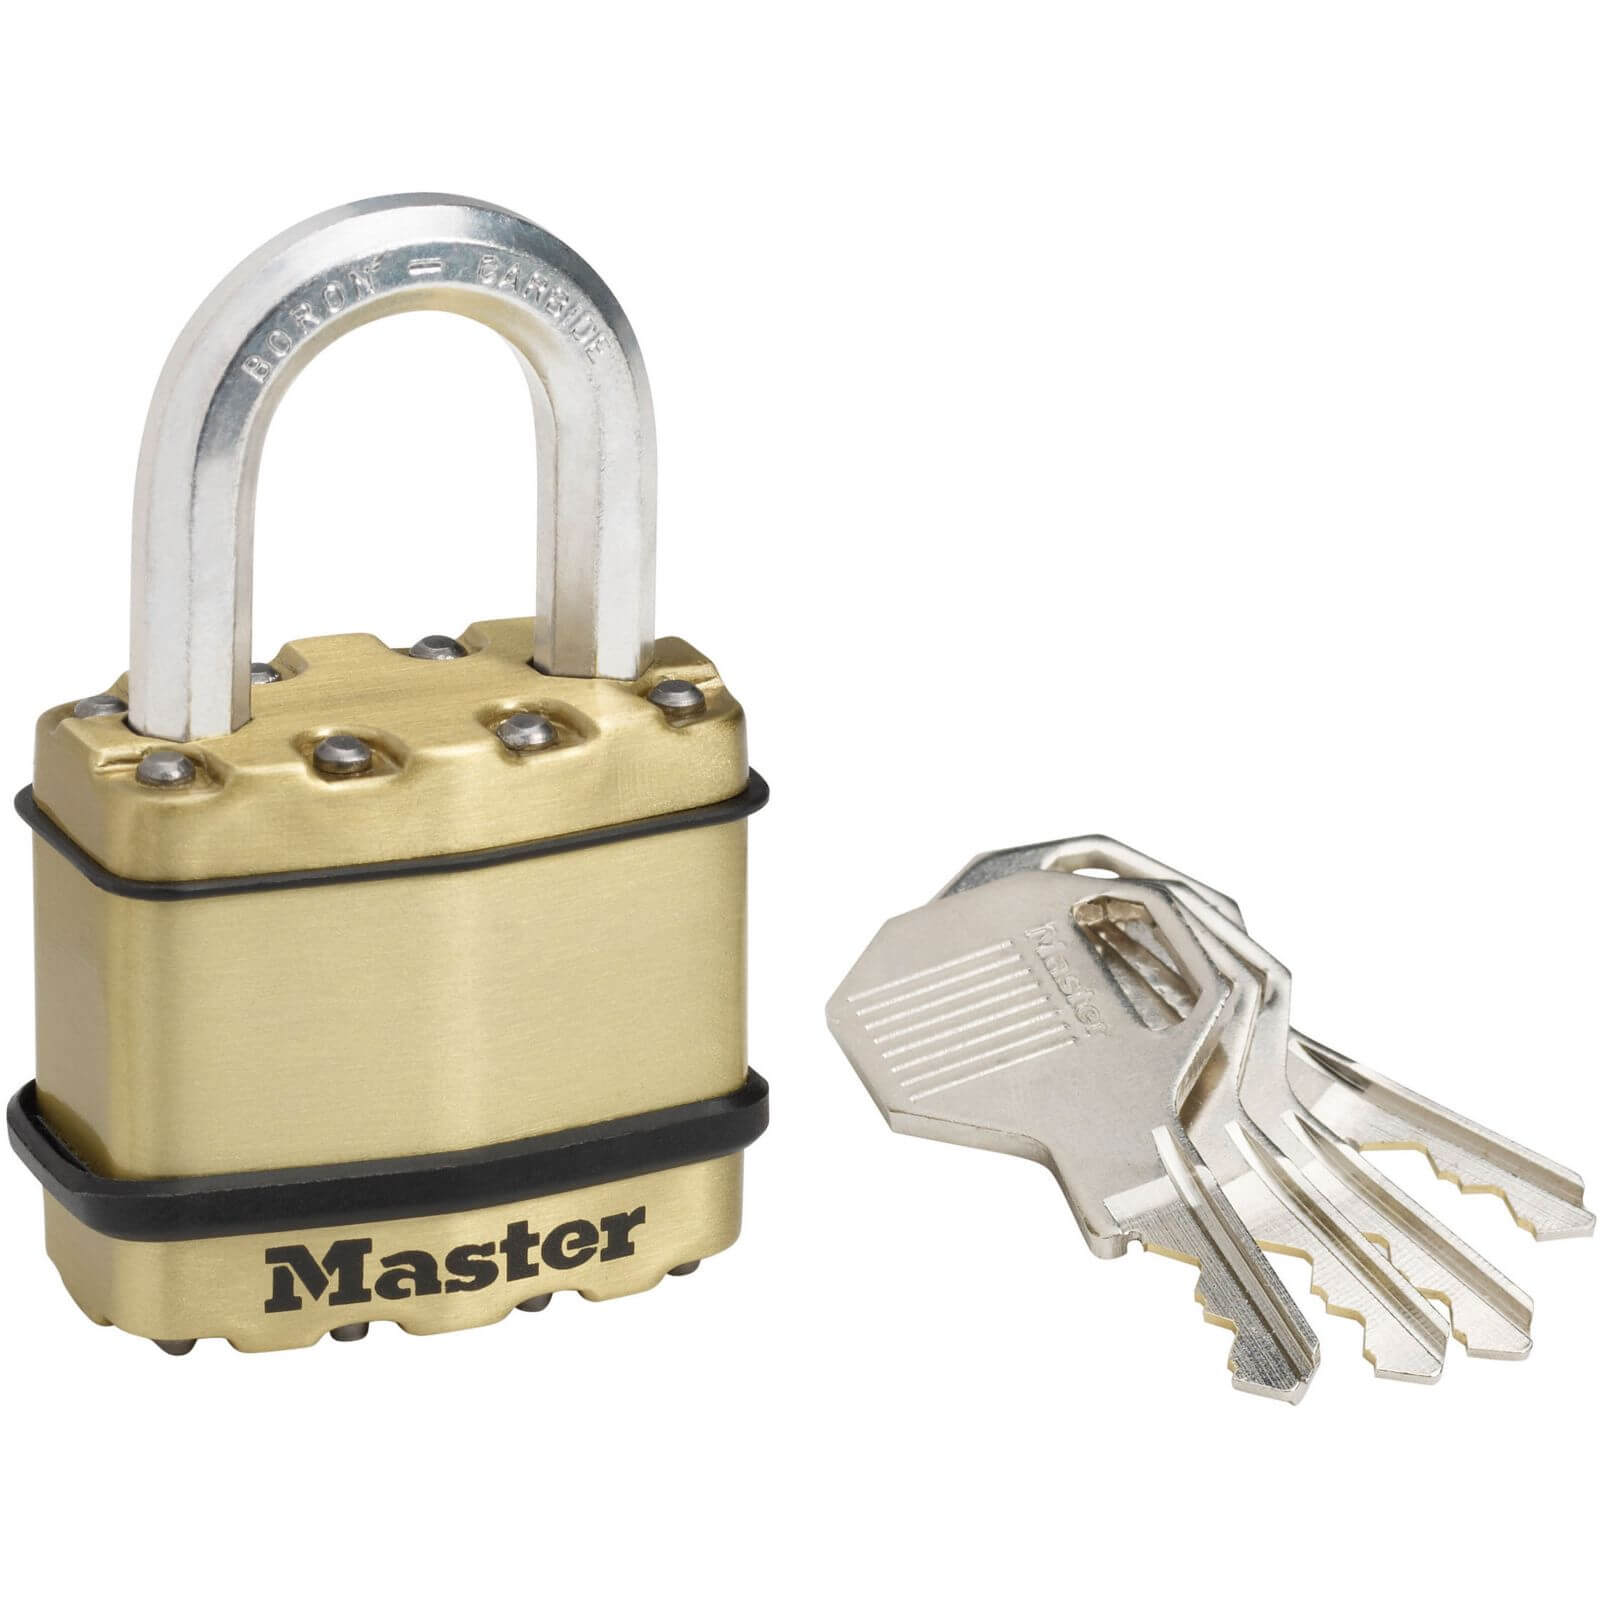 Master Lock Excell Laminated Steel Padlock with Brass Finish - 45mm